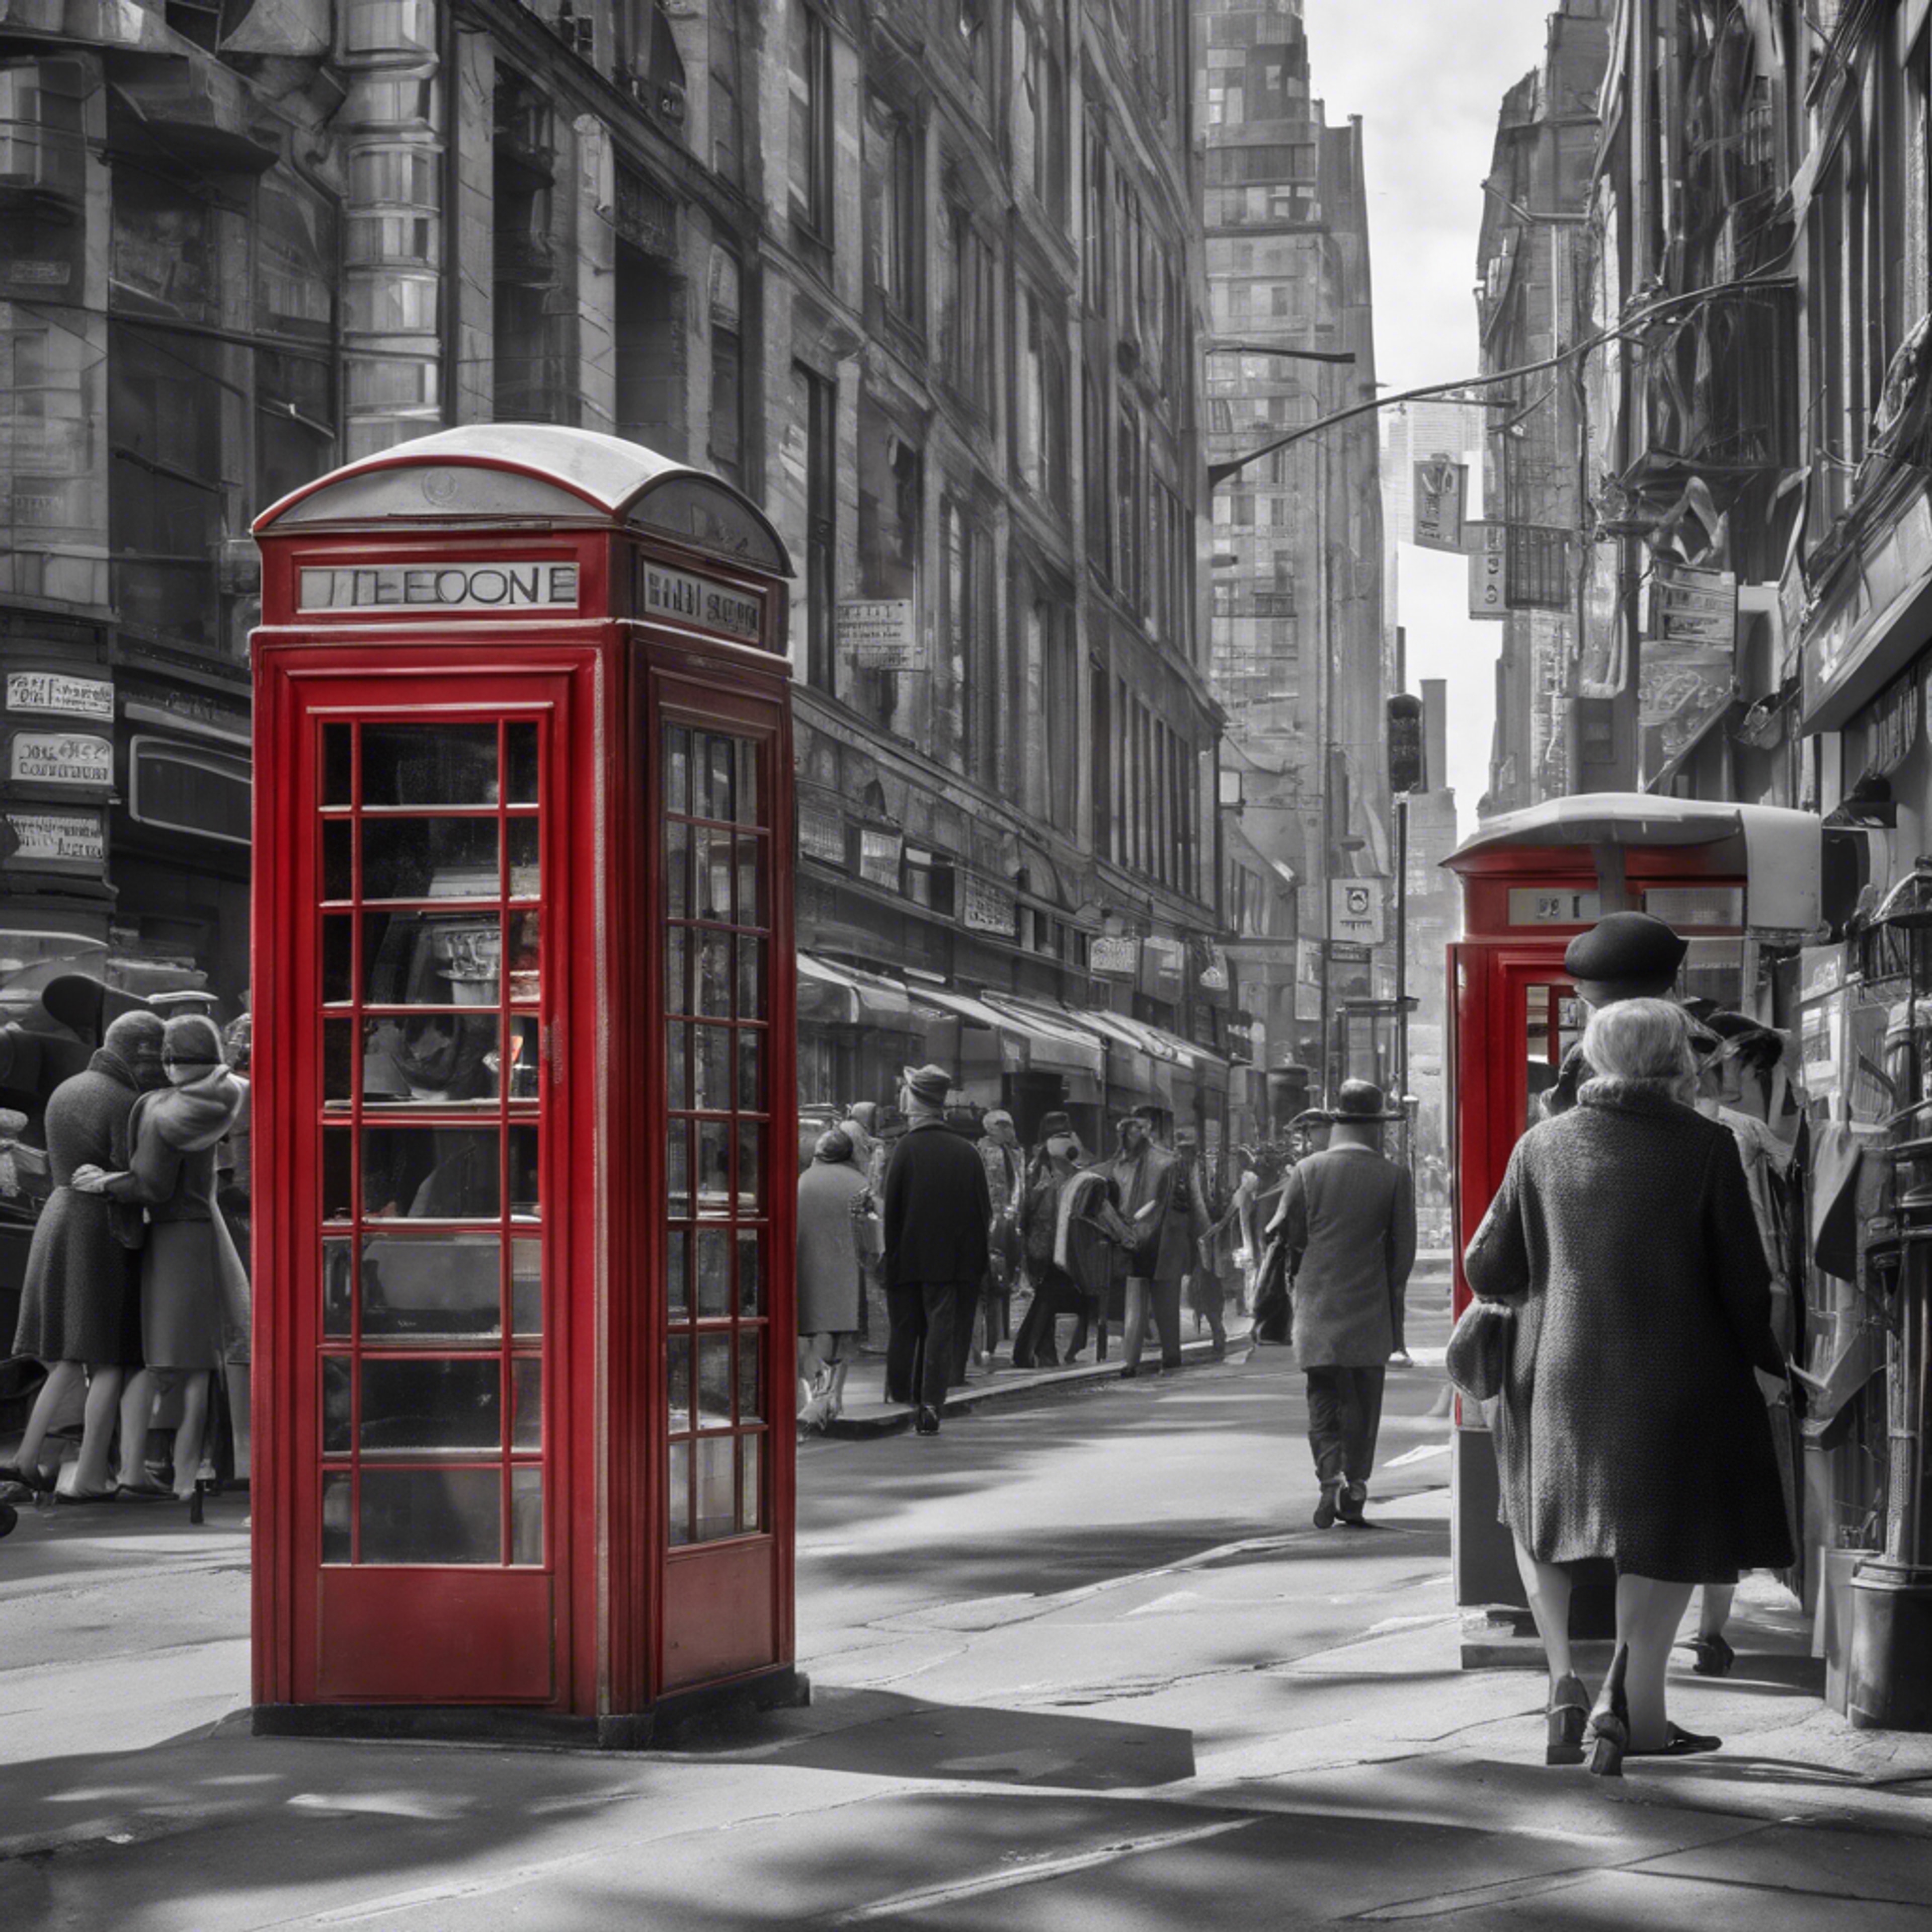 A black and white picture of a busy city street in the 1960s, with one characteristic iconic red phone booth. Fondo de pantalla[8cad1b57085c4579b492]